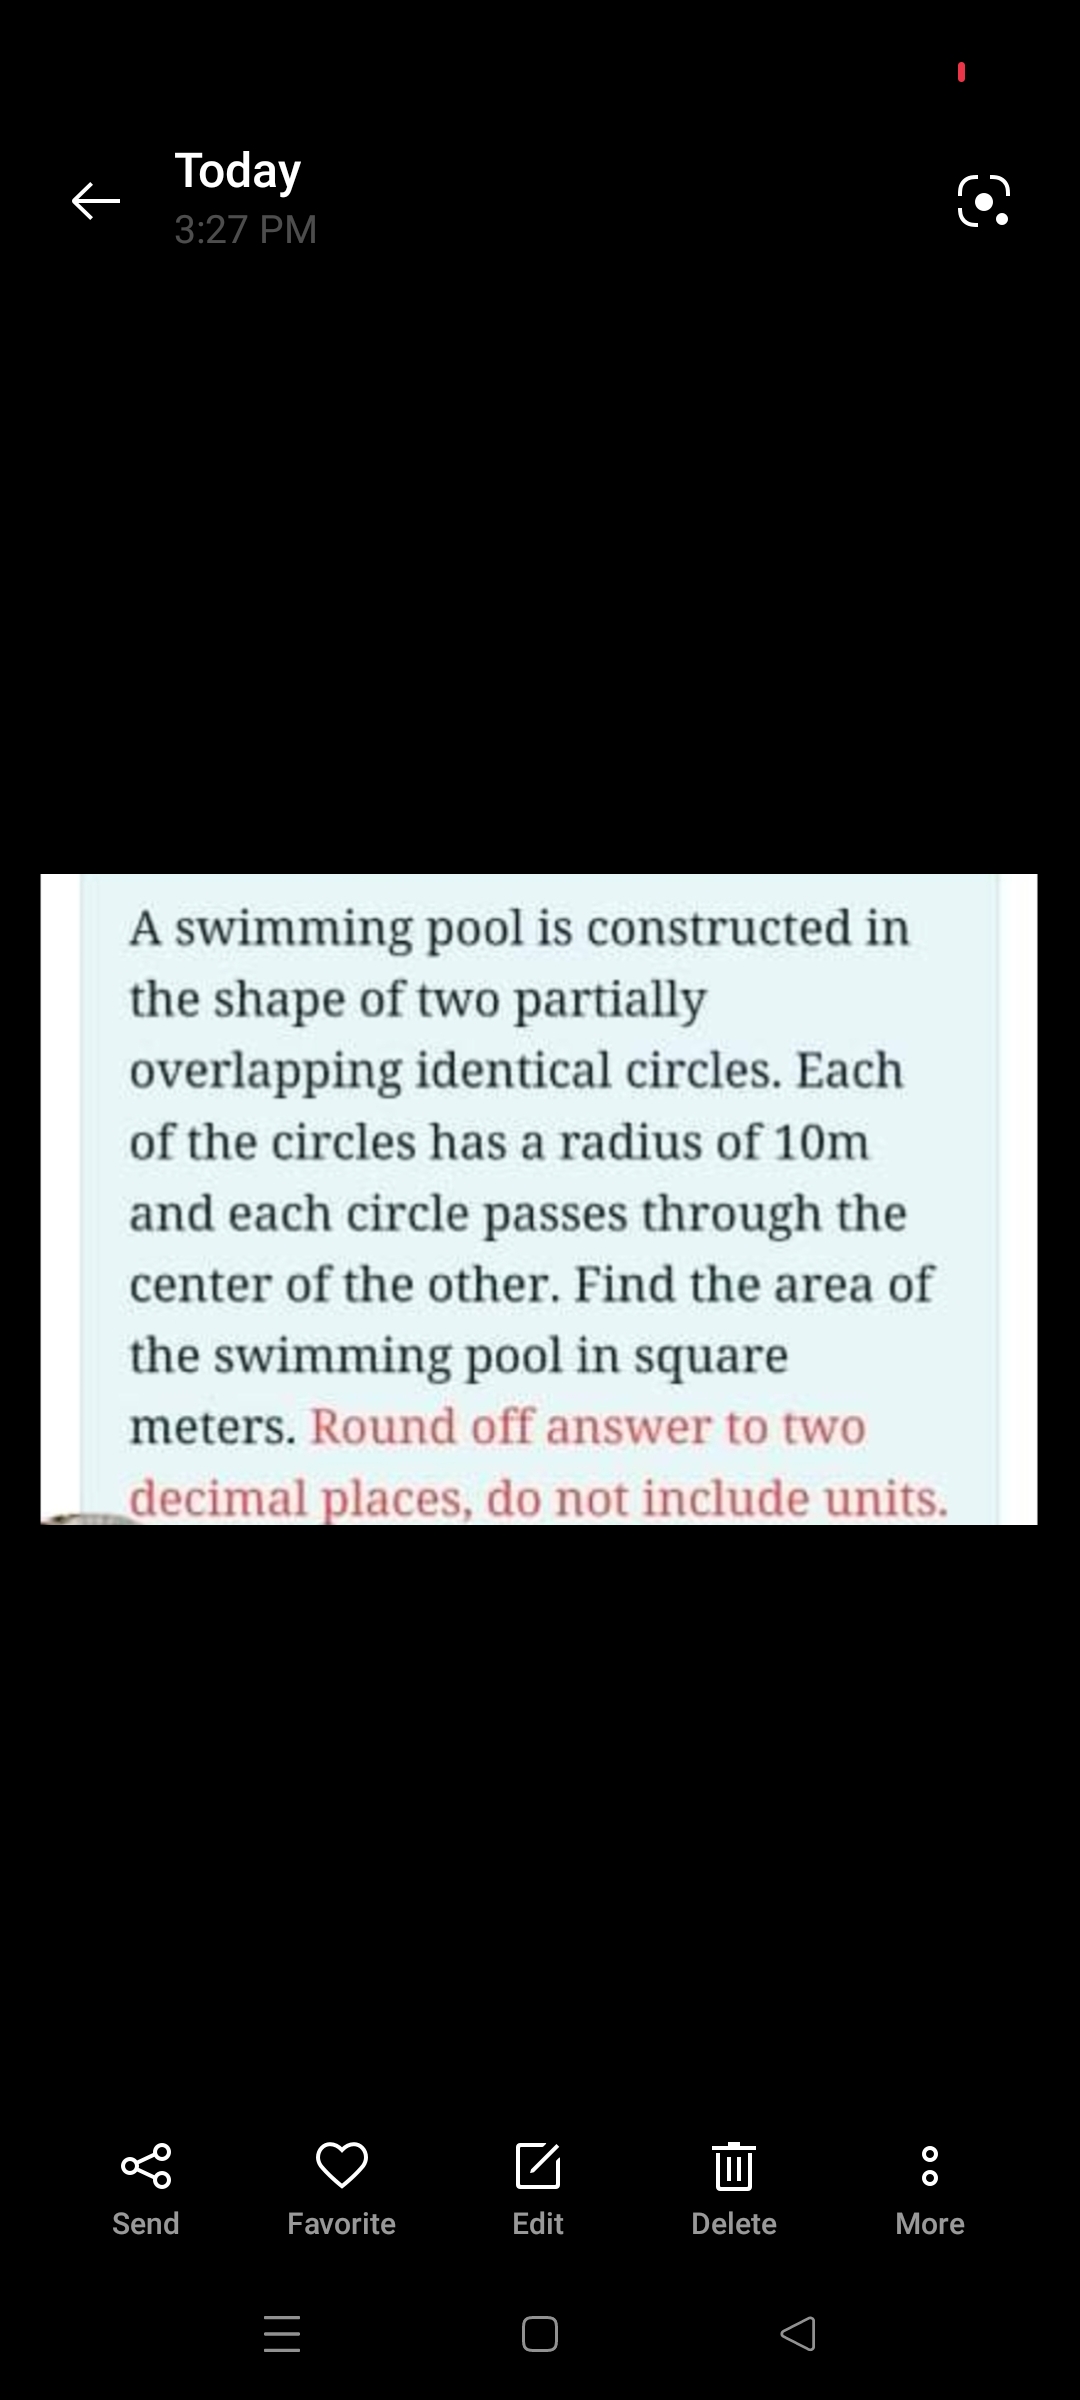 Today
3:27 PM
A swimming pool is constructed in
the shape of two partially
overlapping identical circles. Each
of the circles has a radius of 10m
and each circle passes through the
center of the other. Find the area of
the swimming pool in square
meters. Round off answer to two
decimal places, do not include units.
Send
Favorite
Edit
Delete
More
